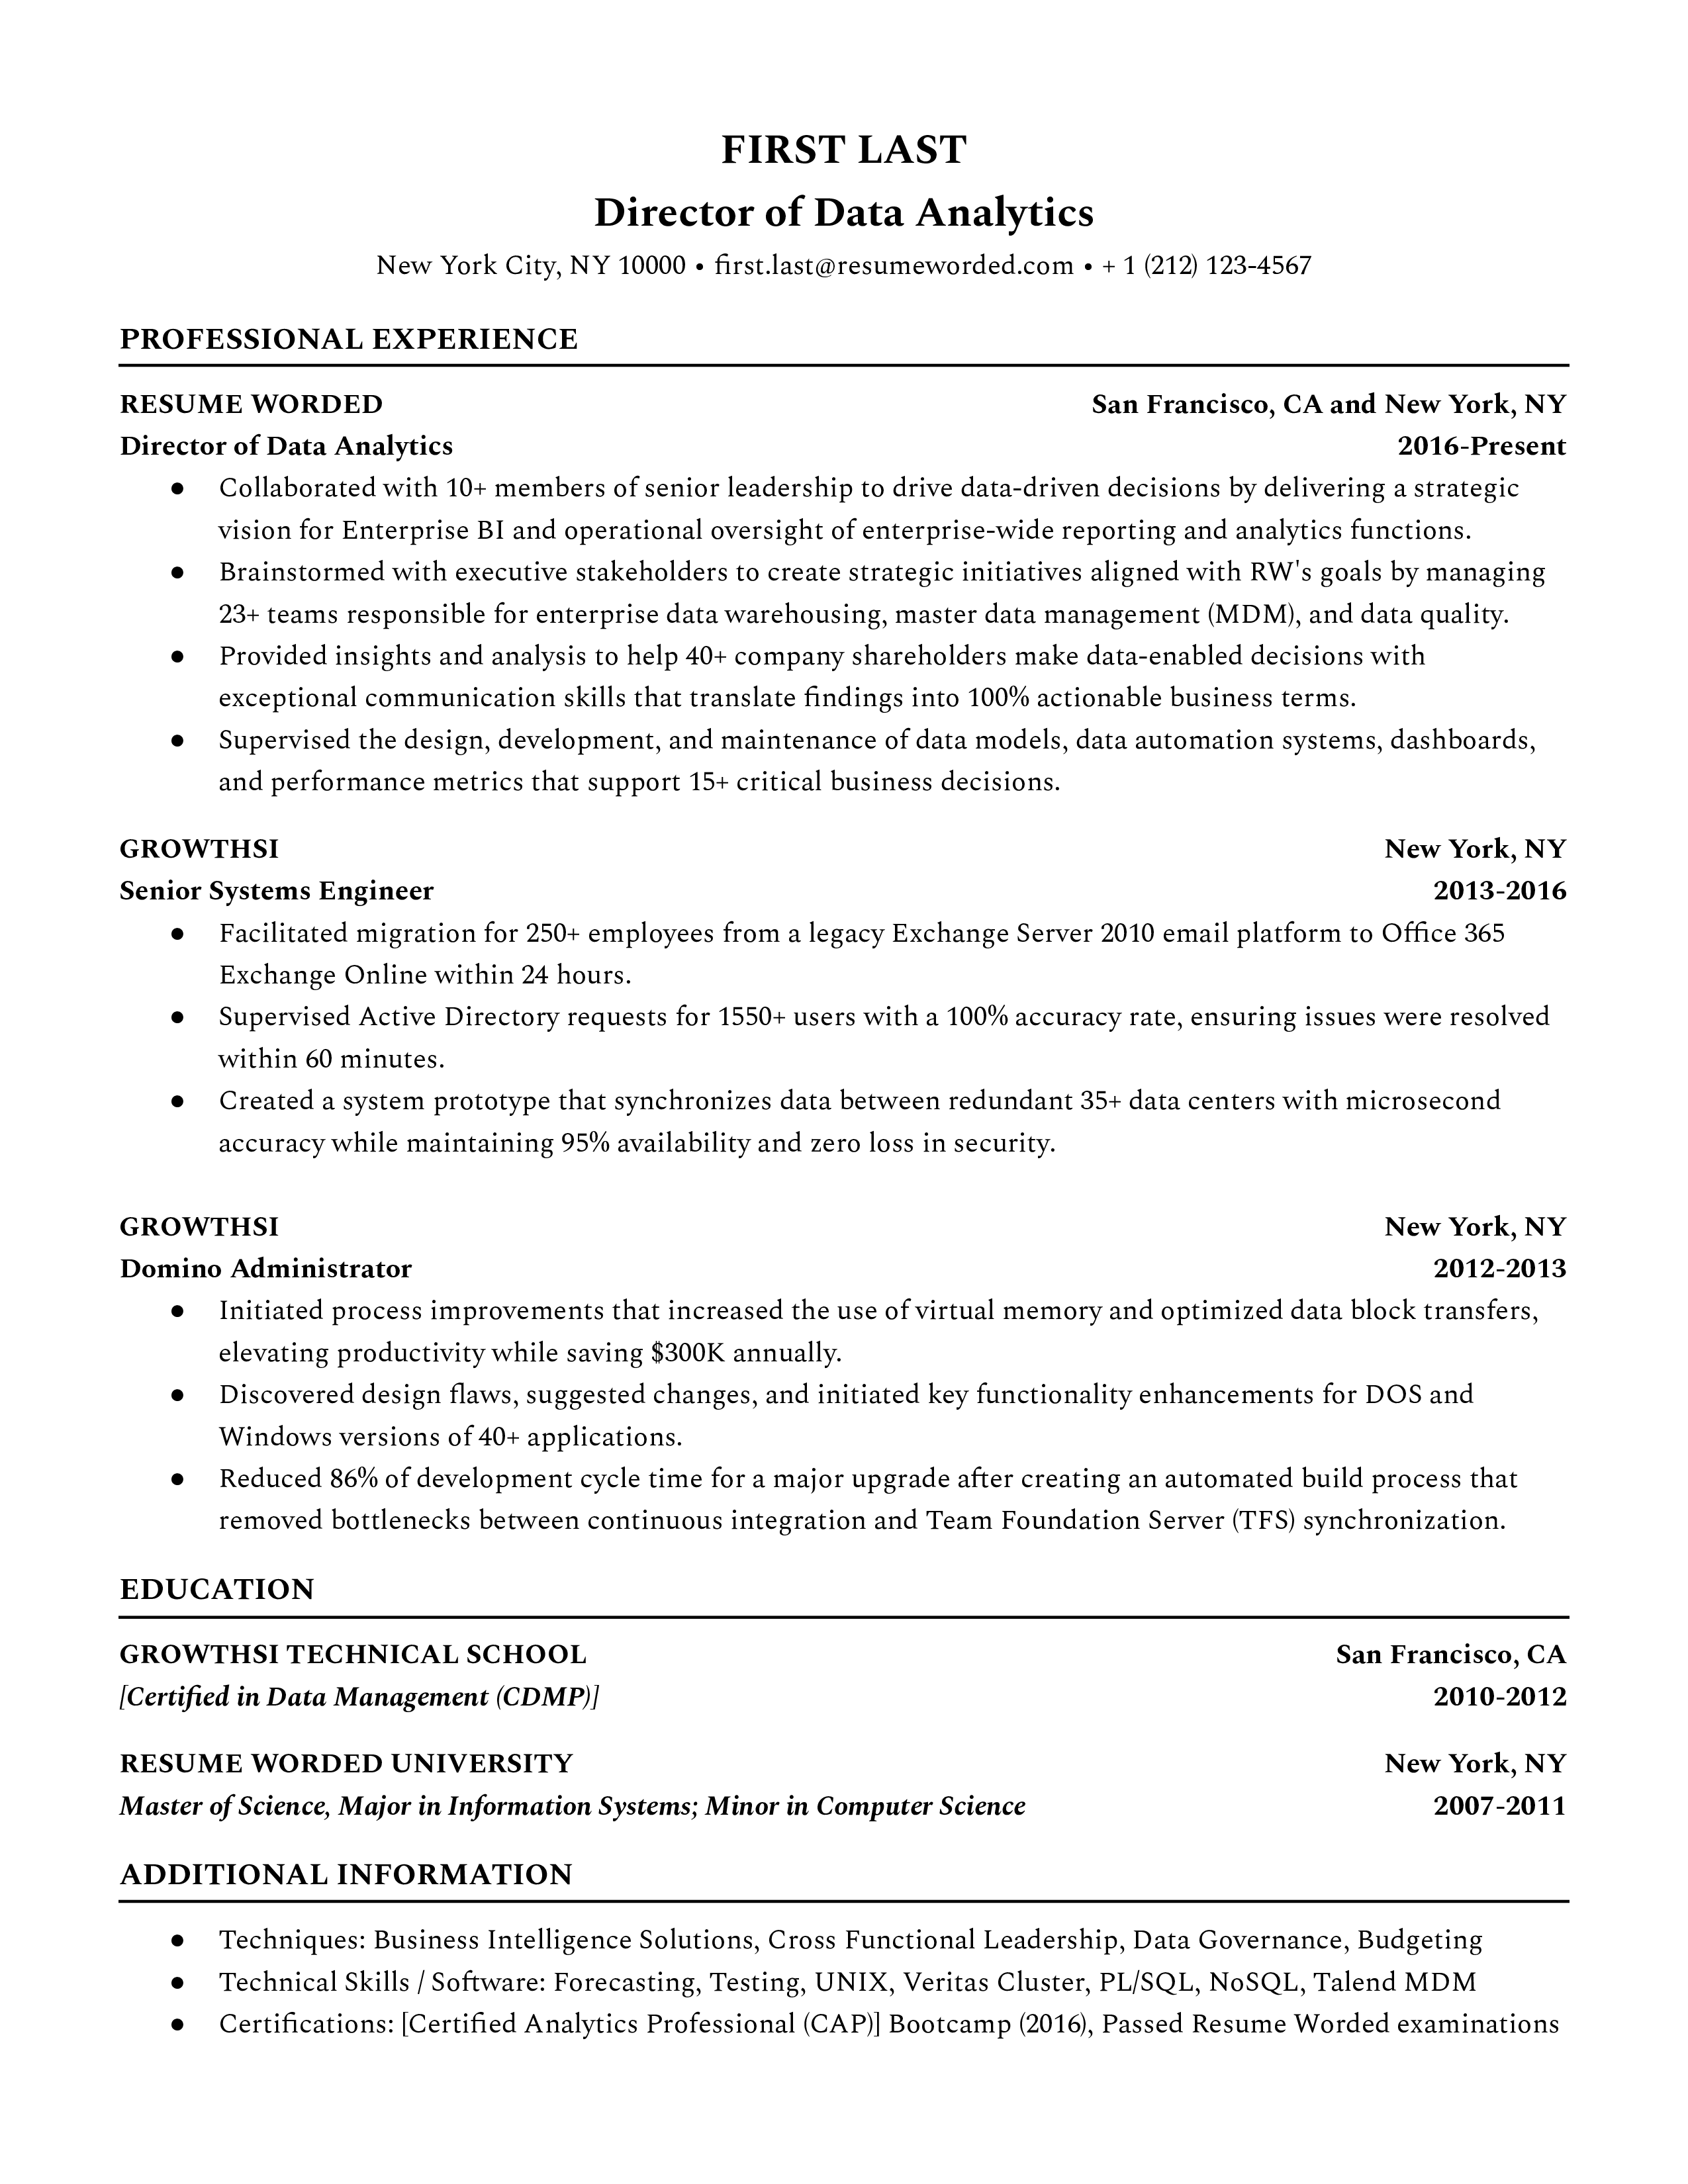 A director of data analytics resume template that highlights the professional experience